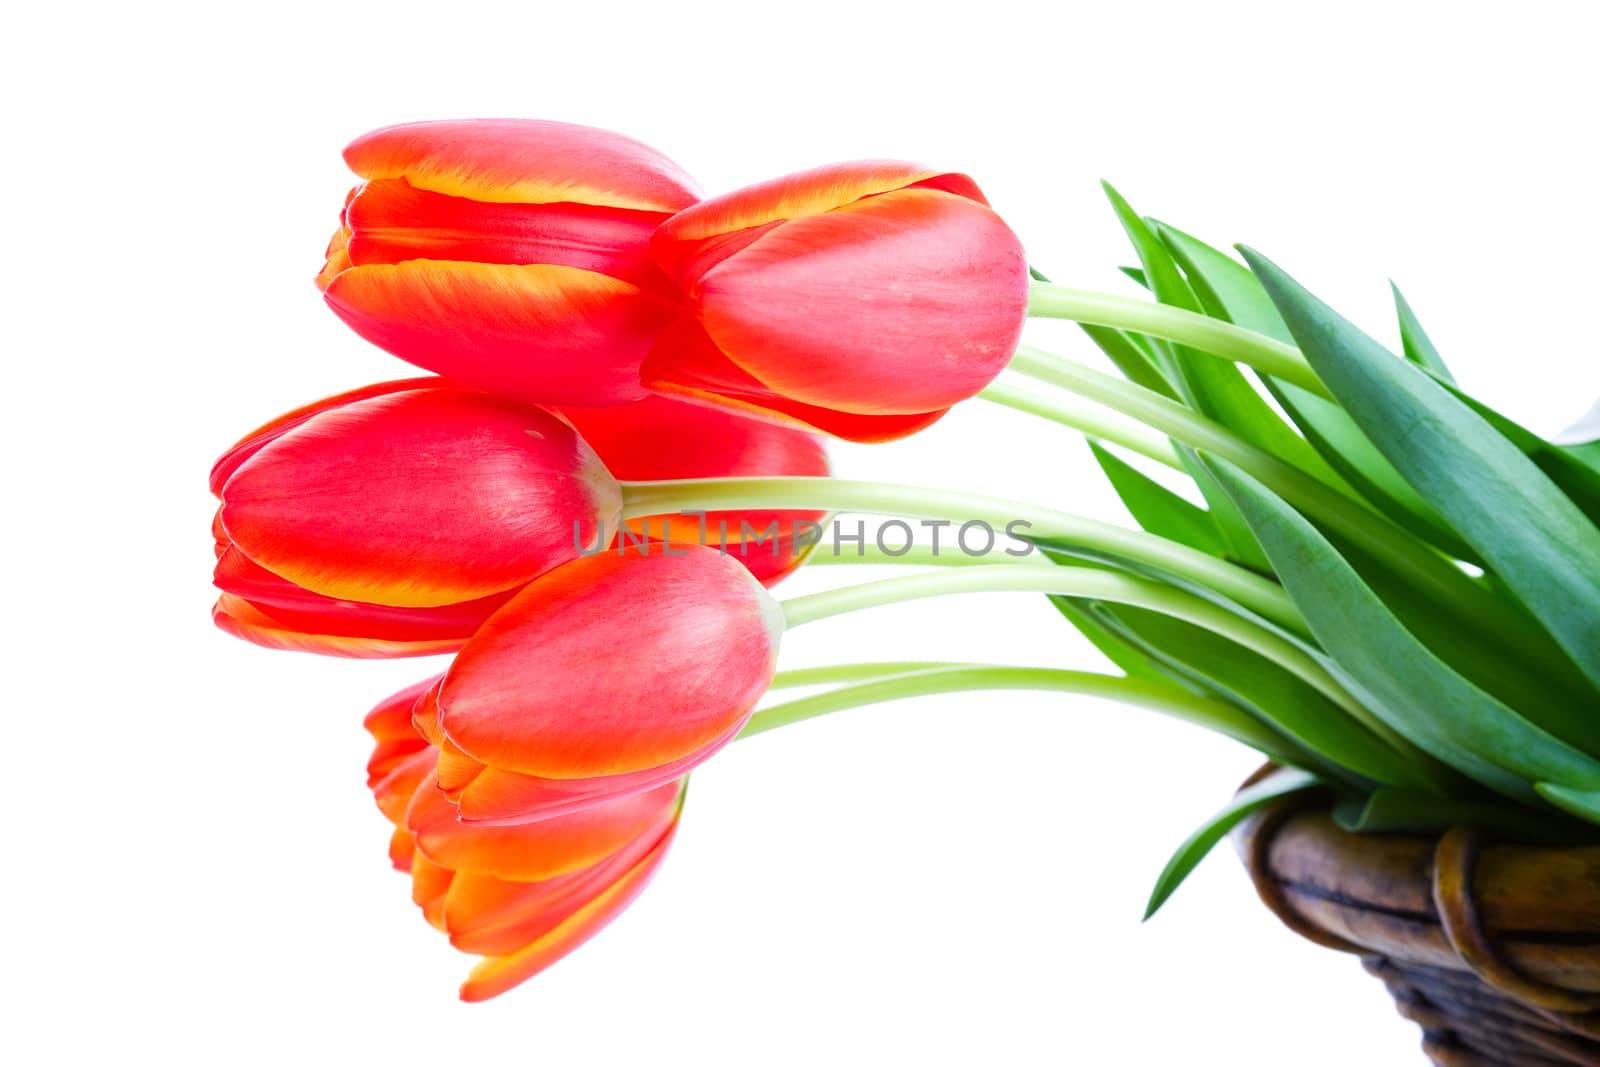 Fresh cut tulips hanging out of a garden basket.  Shot on white background.